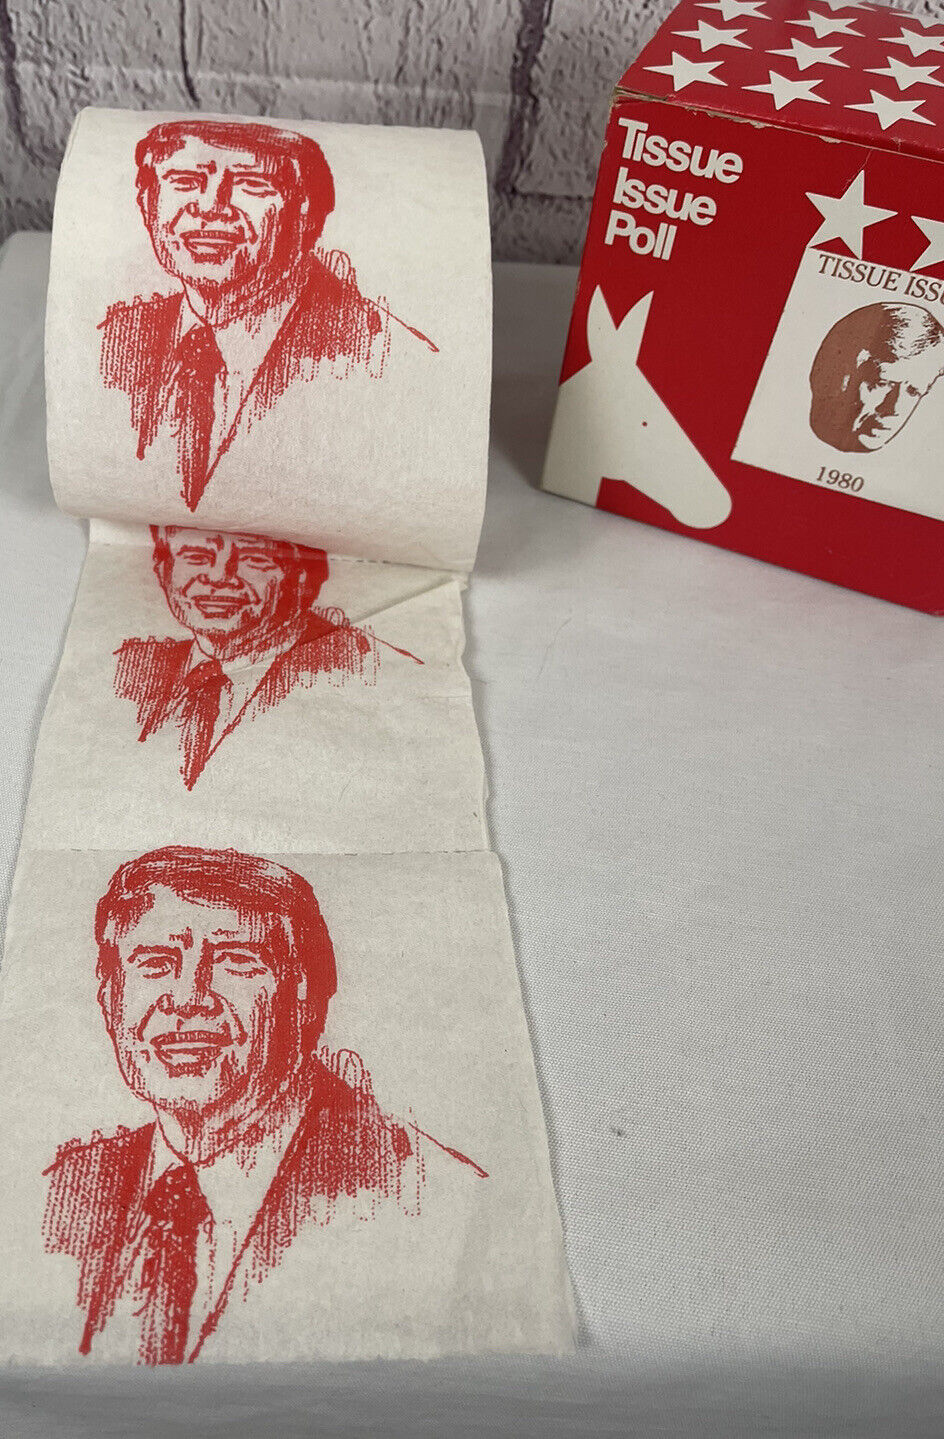 VTG Jimmy Carter Tissue Issue Poll Gag Gift Collectible Toilet Paper In Box 1980